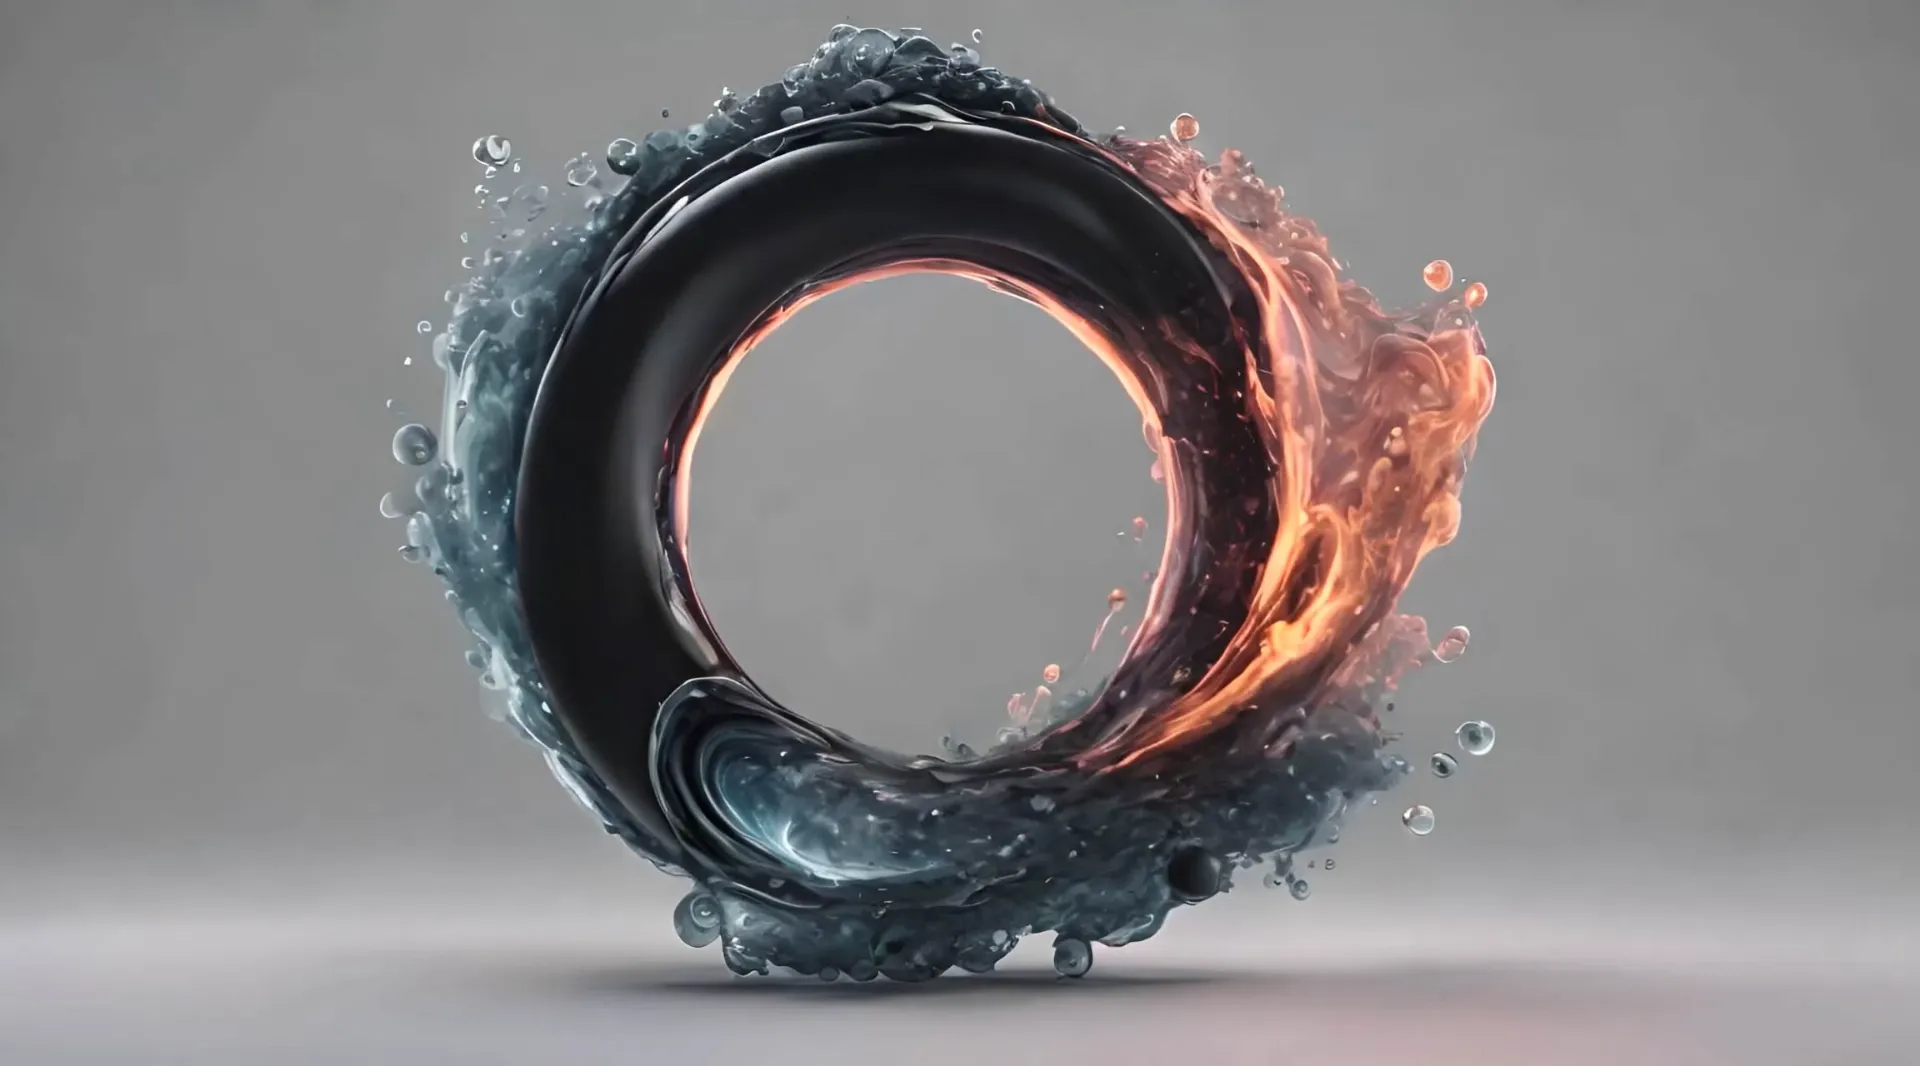 Fiery Swirl and Aquatic Elegance Abstract Backdrop